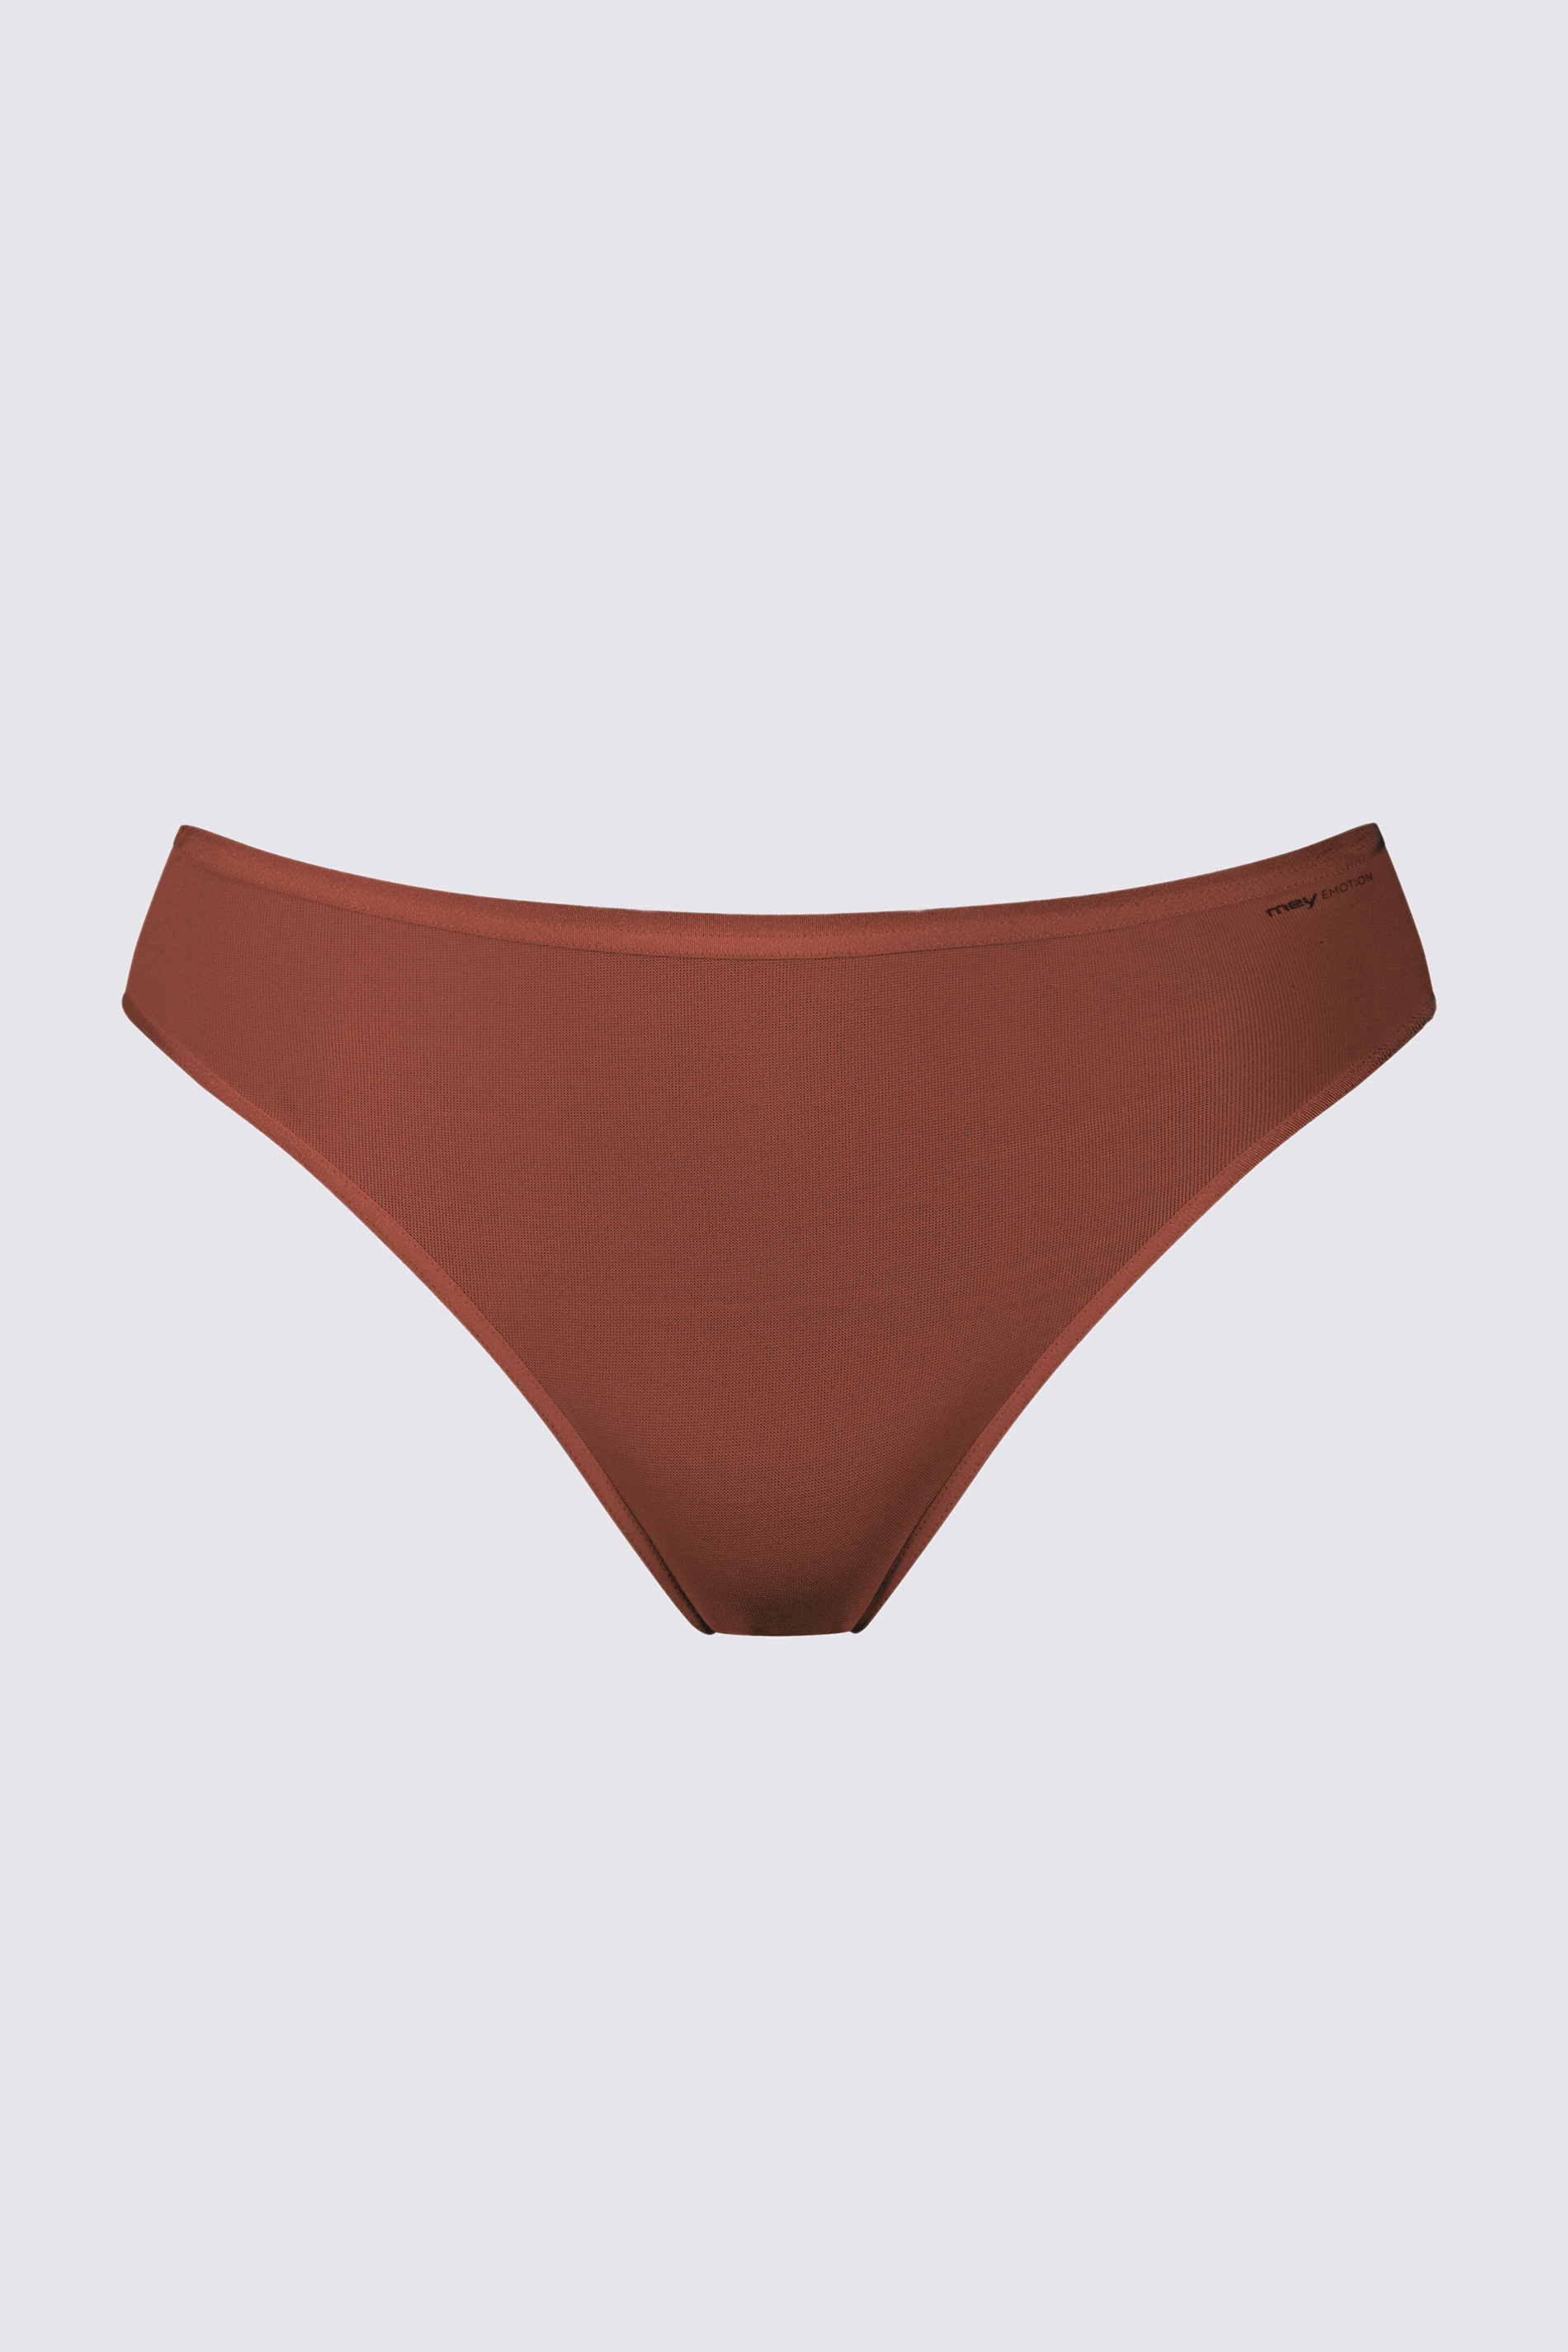 Jazz briefs Red Pepper Serie Emotion Cut Out | mey®